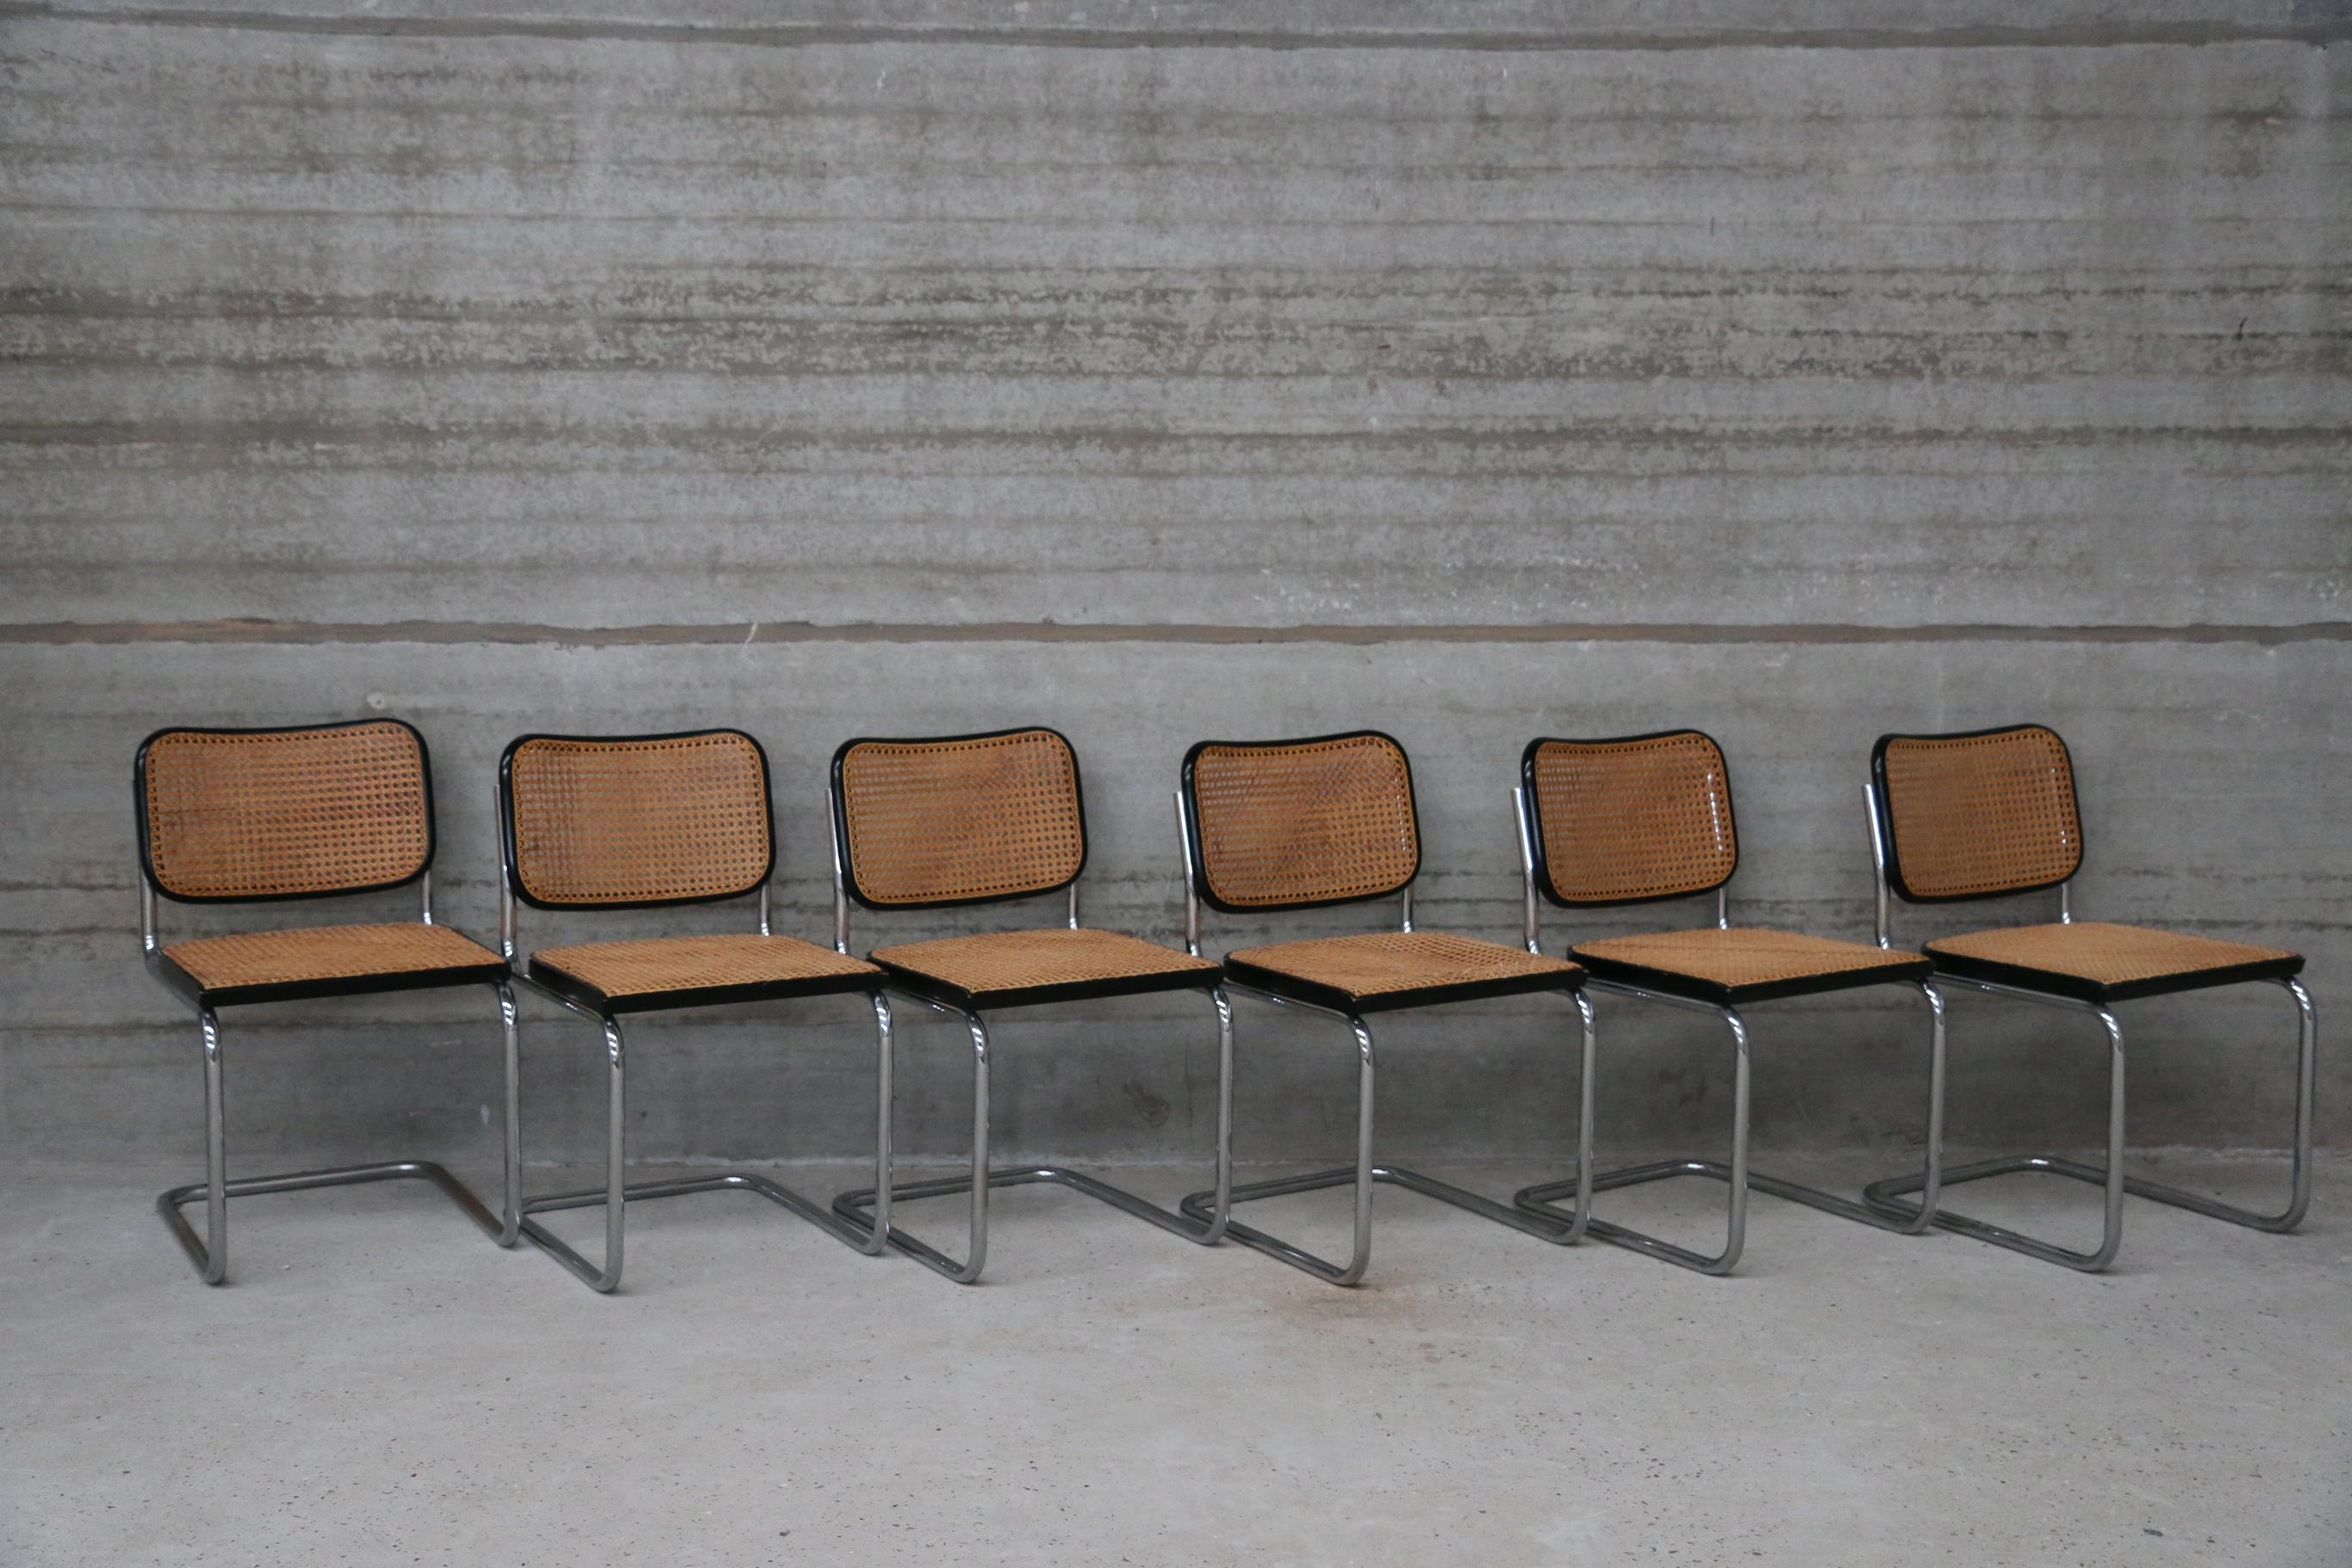 Stunning set of midcentury late 1960s Cane Cesca sidechairs originally designed by Marcel Breuer in 1928. All hand caning (see photos) and both chairs still retain markings of both Knoll and Gavina. Chrome tubular frames. Chairs are an early